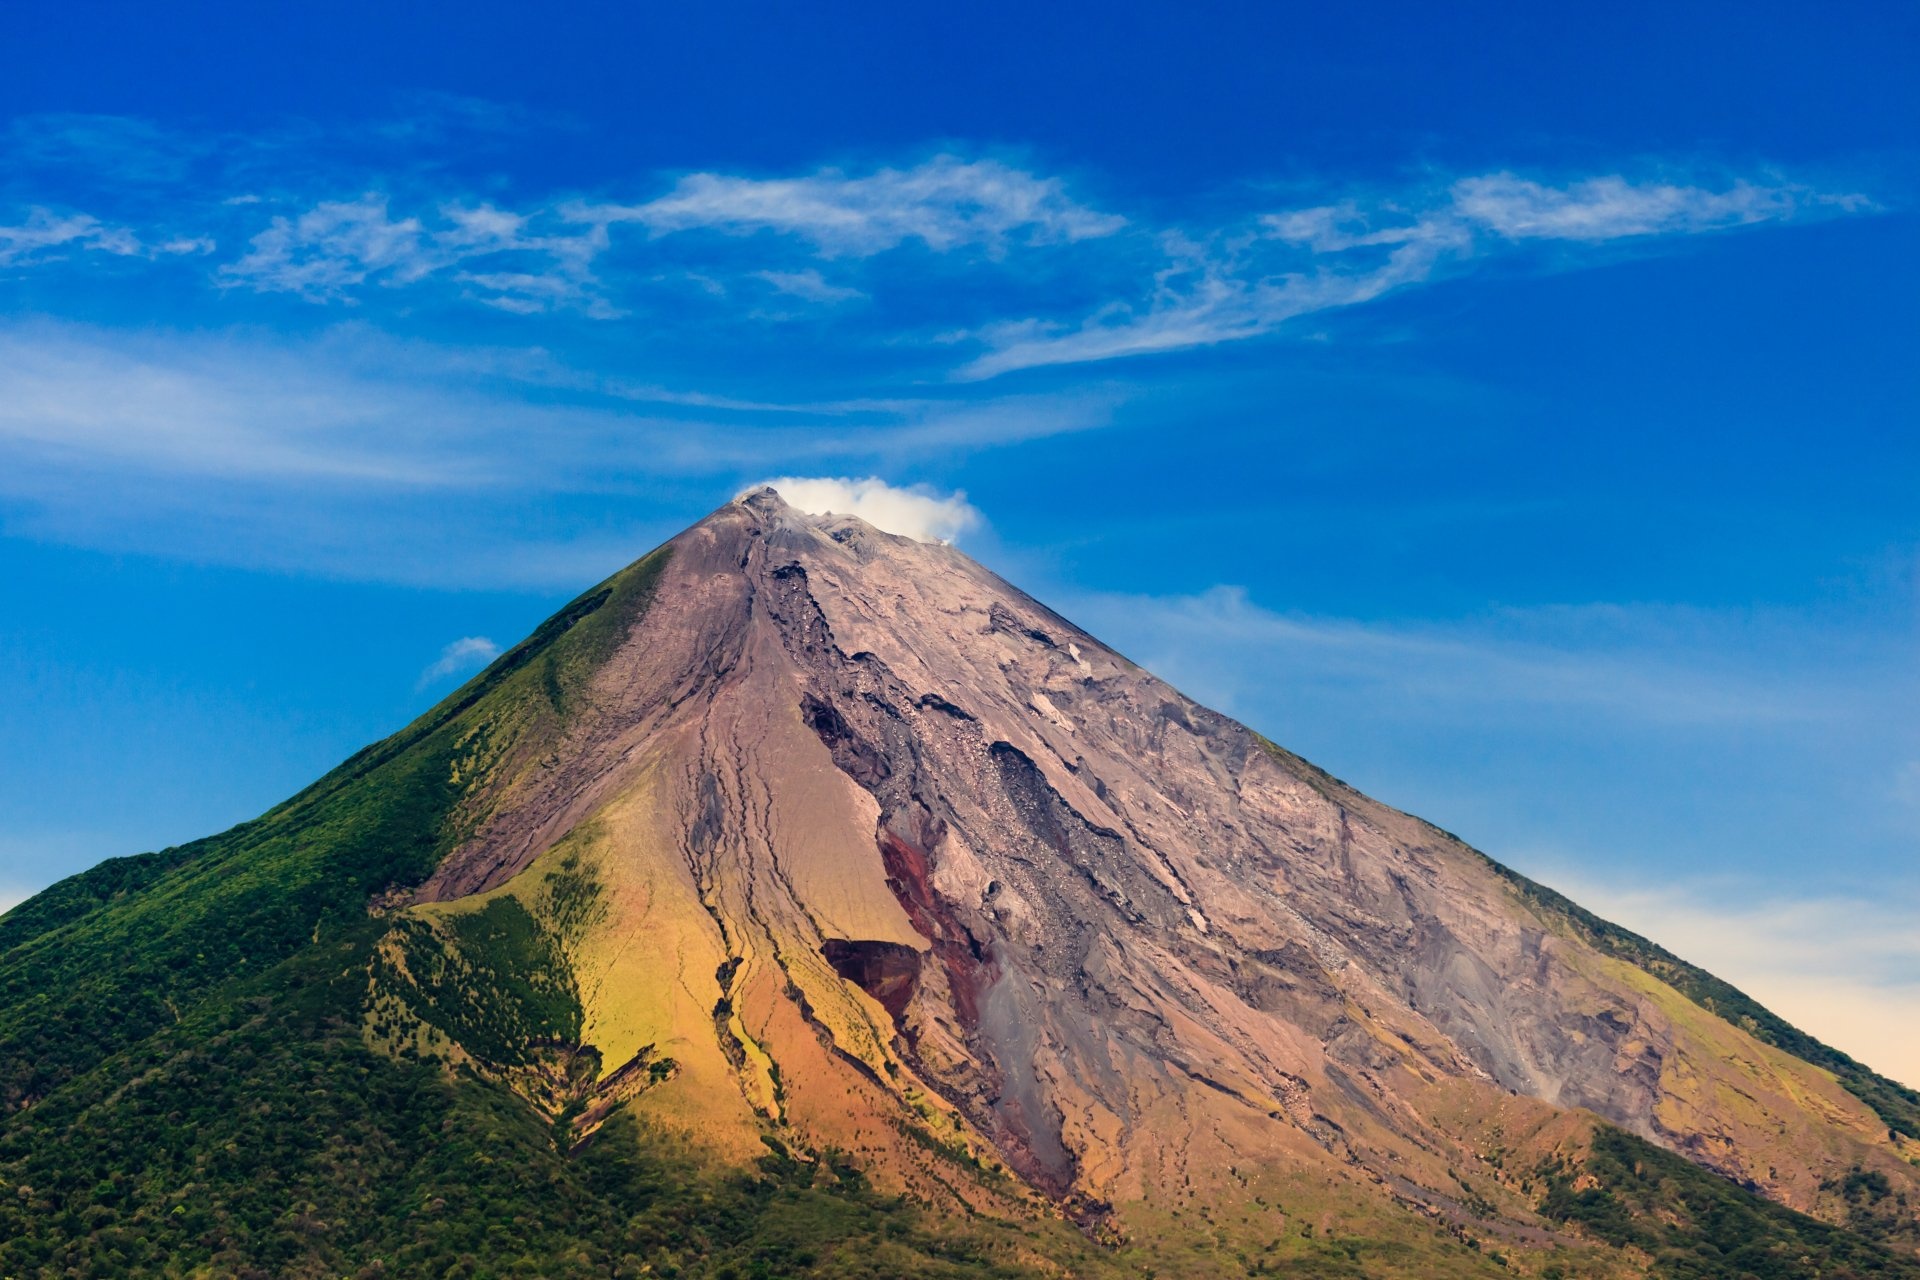 Nicaragua: Concepcion, An active stratovolcano that forms the northwest part of the Isla de Ometepe. 1920x1280 HD Wallpaper.